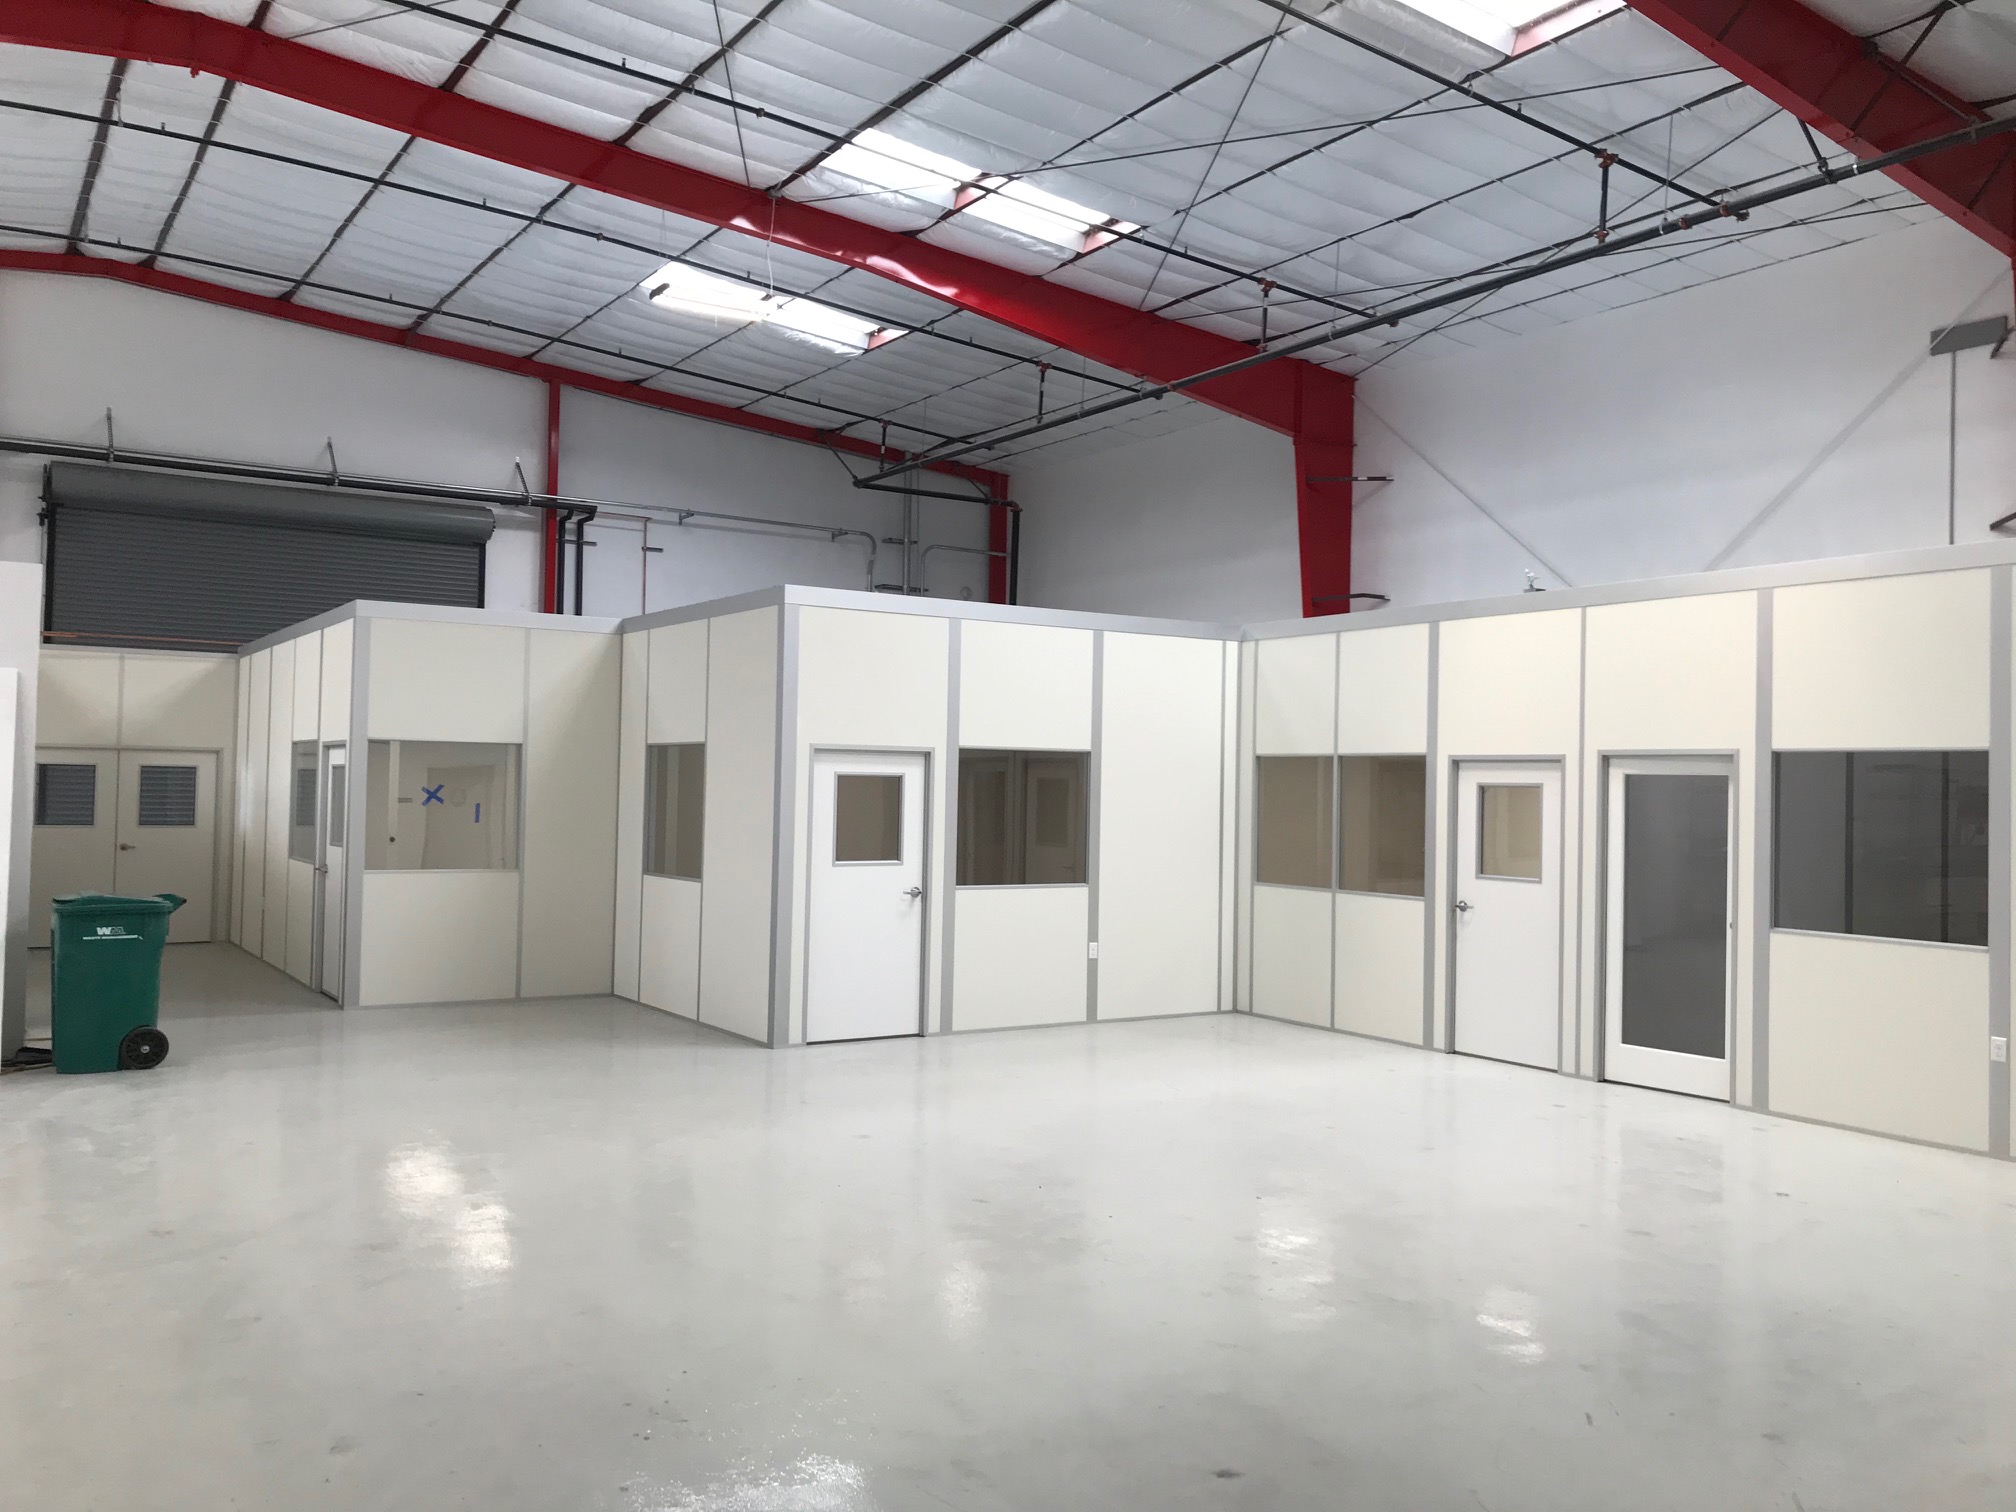 modular buildings, wall partitions, and enclosures